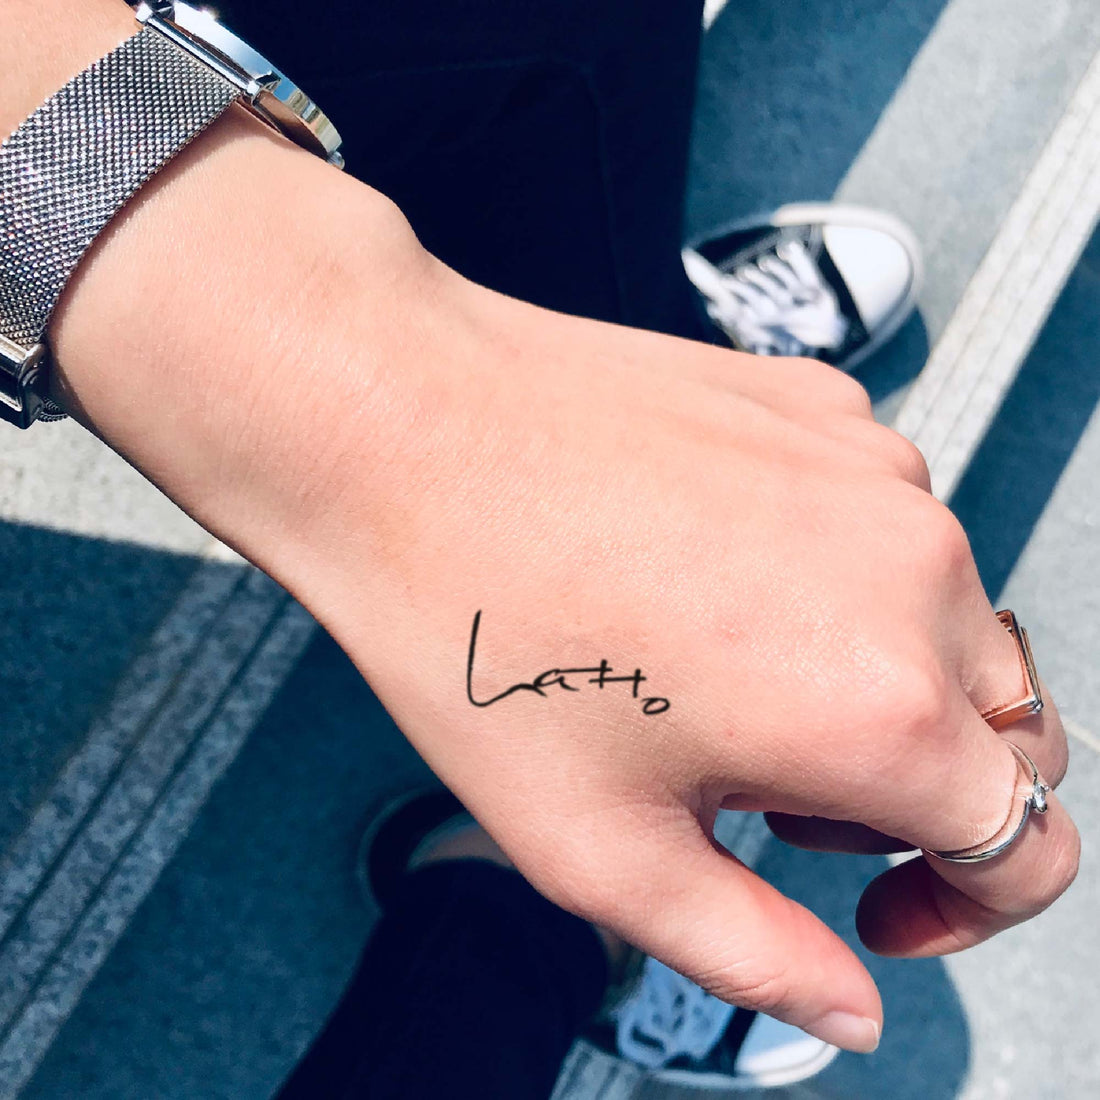 Latto custom temporary tattoo sticker design idea inspiration meanings removal arm wrist hand words font name signature calligraphy lyrics tour concert outfits merch accessory gift souvenir costumes wear dress up code